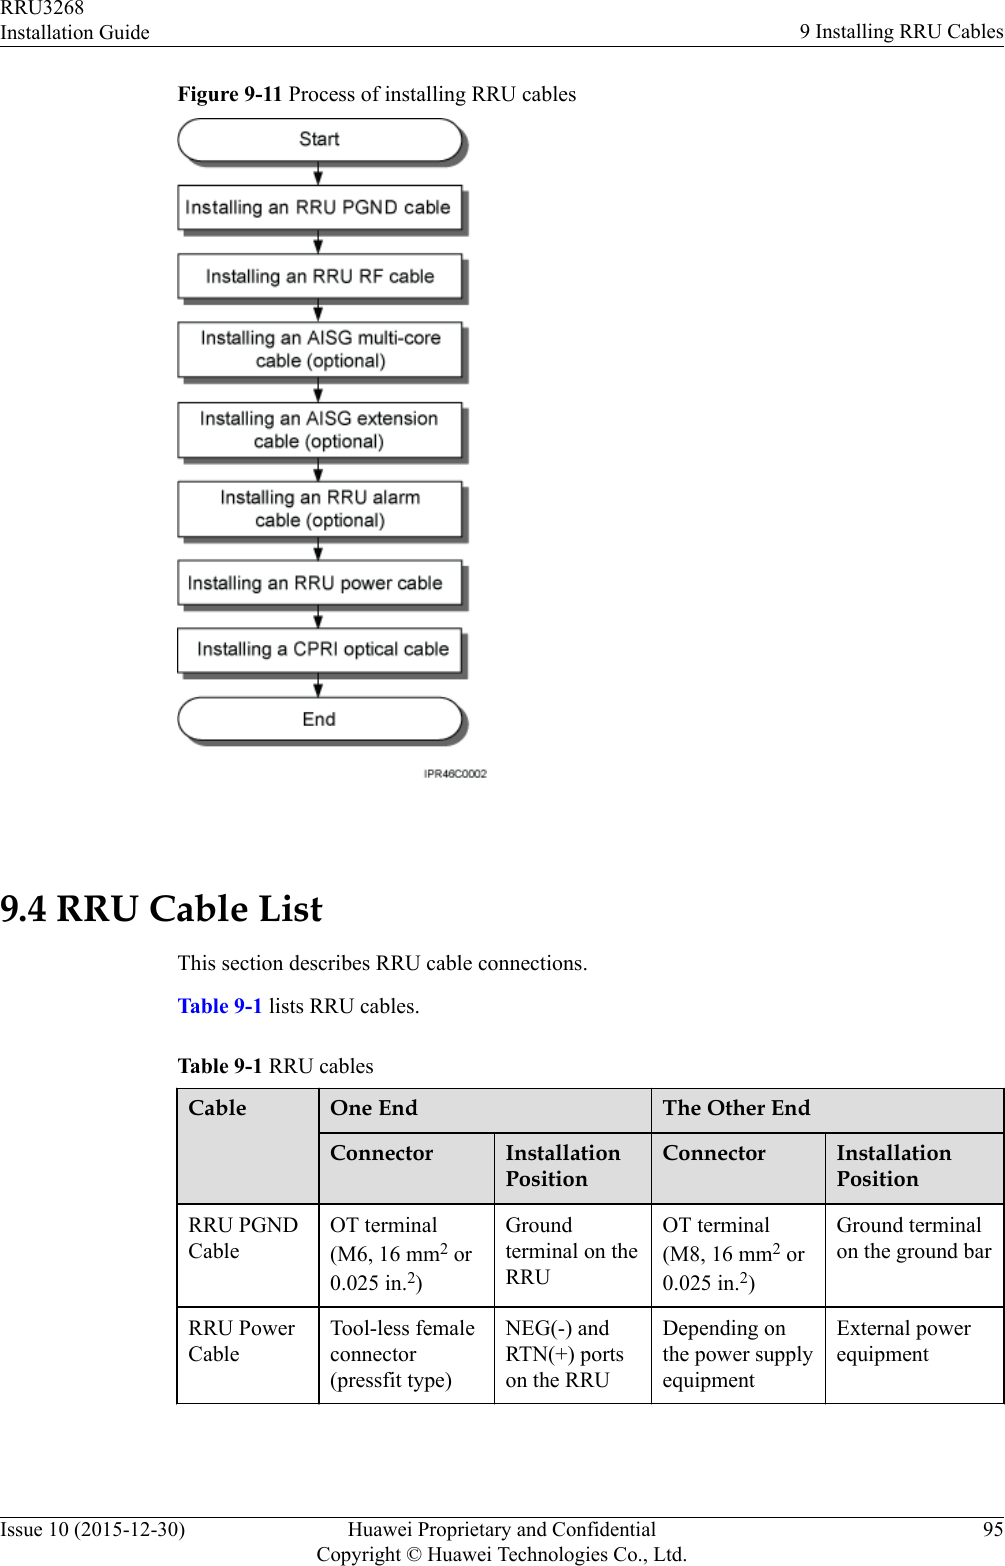 Figure 9-11 Process of installing RRU cables 9.4 RRU Cable ListThis section describes RRU cable connections.Table 9-1 lists RRU cables.Table 9-1 RRU cablesCable One End The Other EndConnector InstallationPositionConnector InstallationPositionRRU PGNDCableOT terminal(M6, 16 mm2 or0.025 in.2)Groundterminal on theRRUOT terminal(M8, 16 mm2 or0.025 in.2)Ground terminalon the ground barRRU PowerCableTool-less femaleconnector(pressfit type)NEG(-) andRTN(+) portson the RRUDepending onthe power supplyequipmentExternal powerequipmentRRU3268Installation Guide 9 Installing RRU CablesIssue 10 (2015-12-30) Huawei Proprietary and ConfidentialCopyright © Huawei Technologies Co., Ltd.95